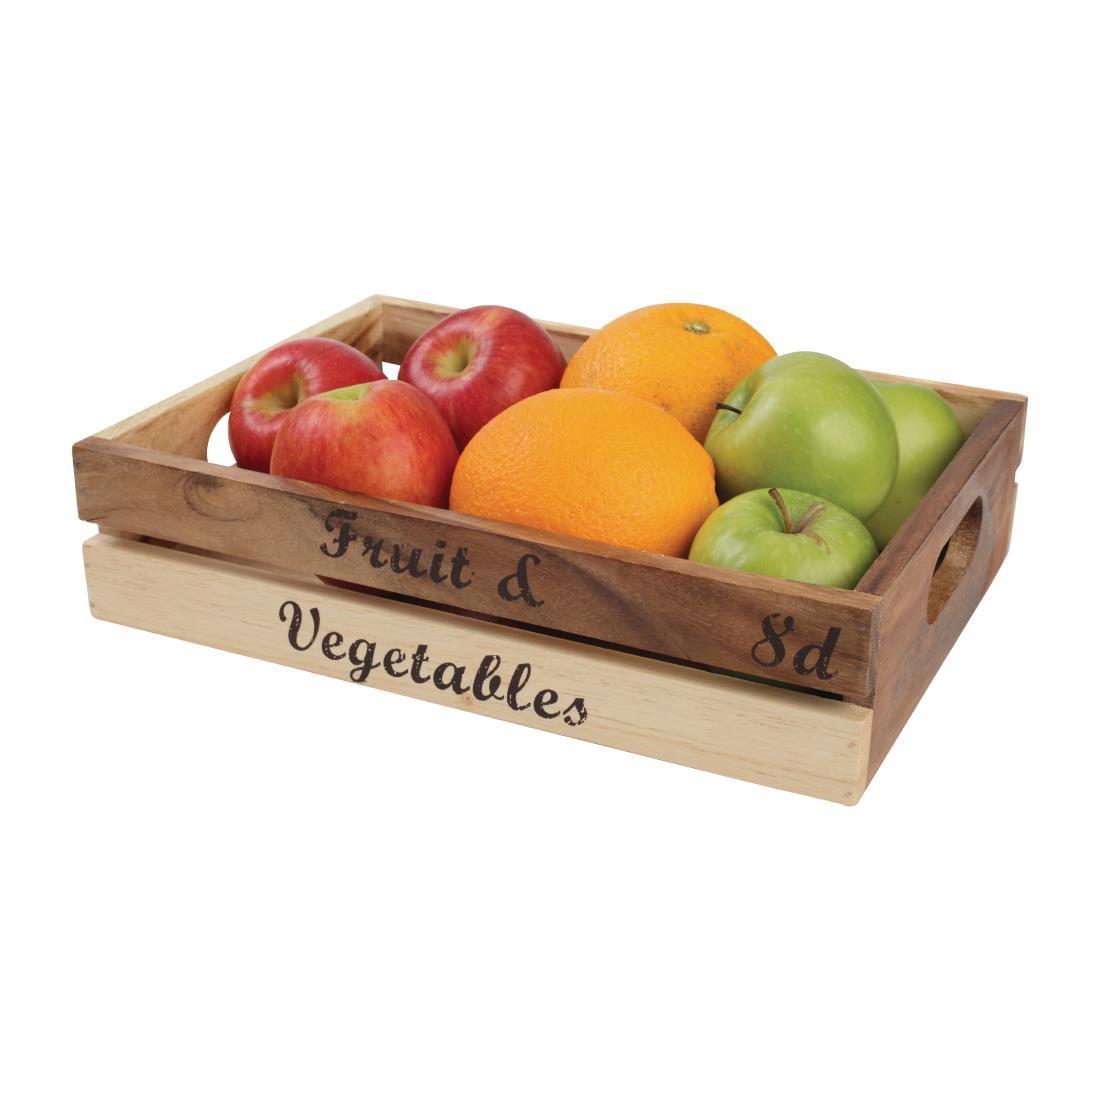 T&G Rustic Wooden Fruit and Veg Crate - GL066  - 2